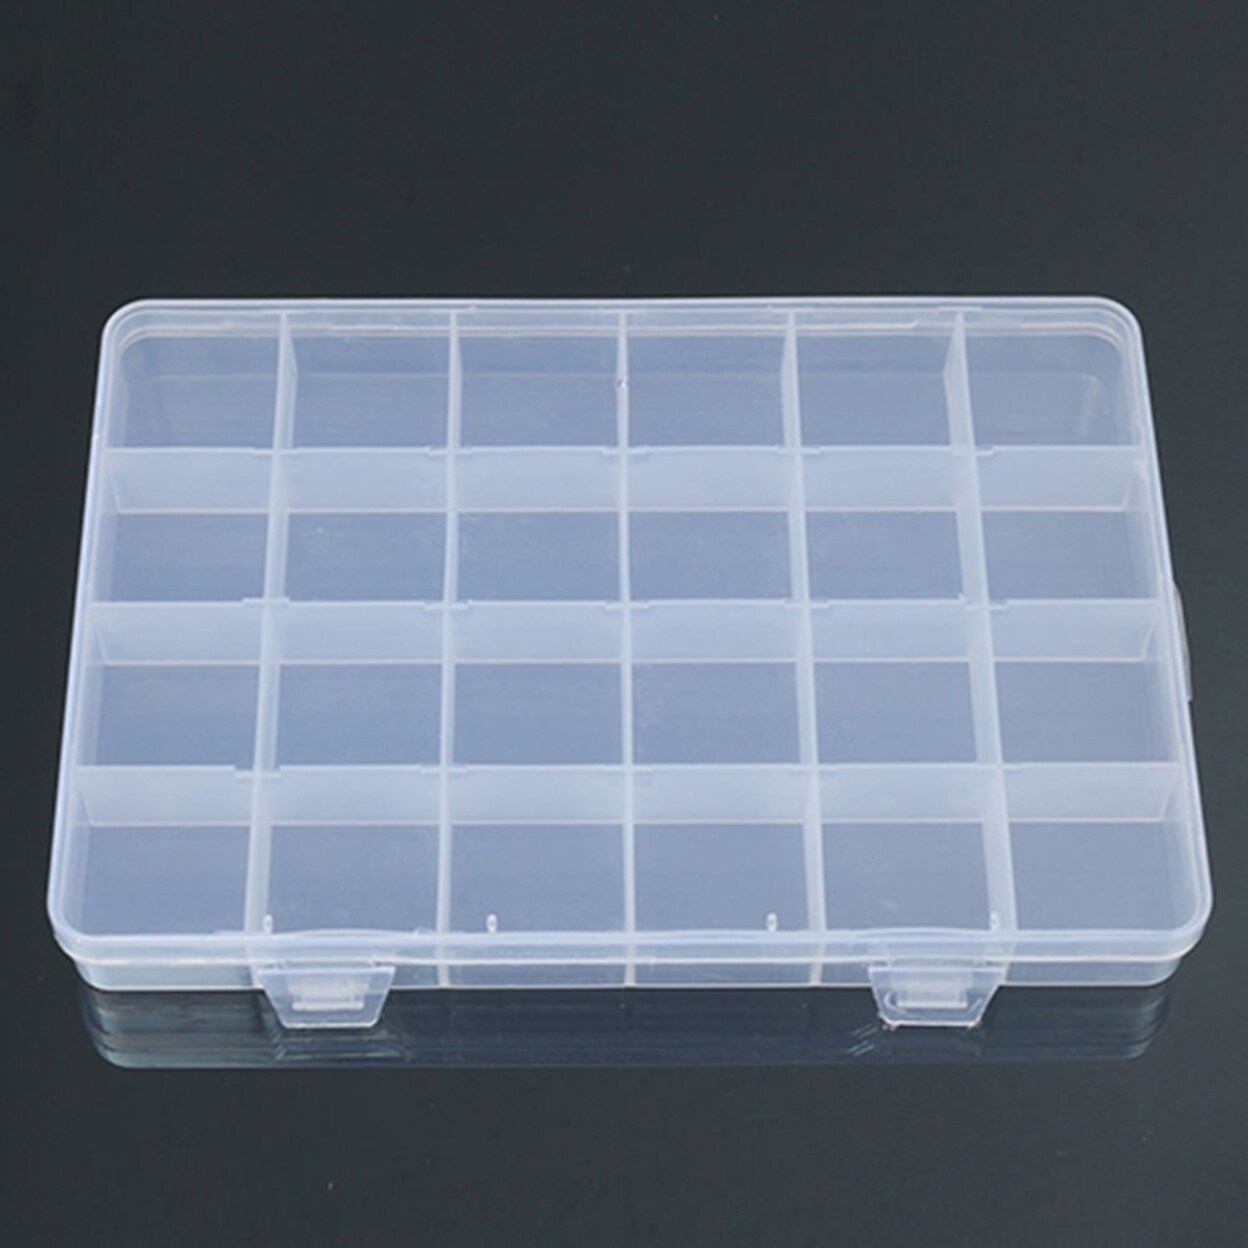 Transparent Plastic Storage Box with Lid for Organizing Jewelry